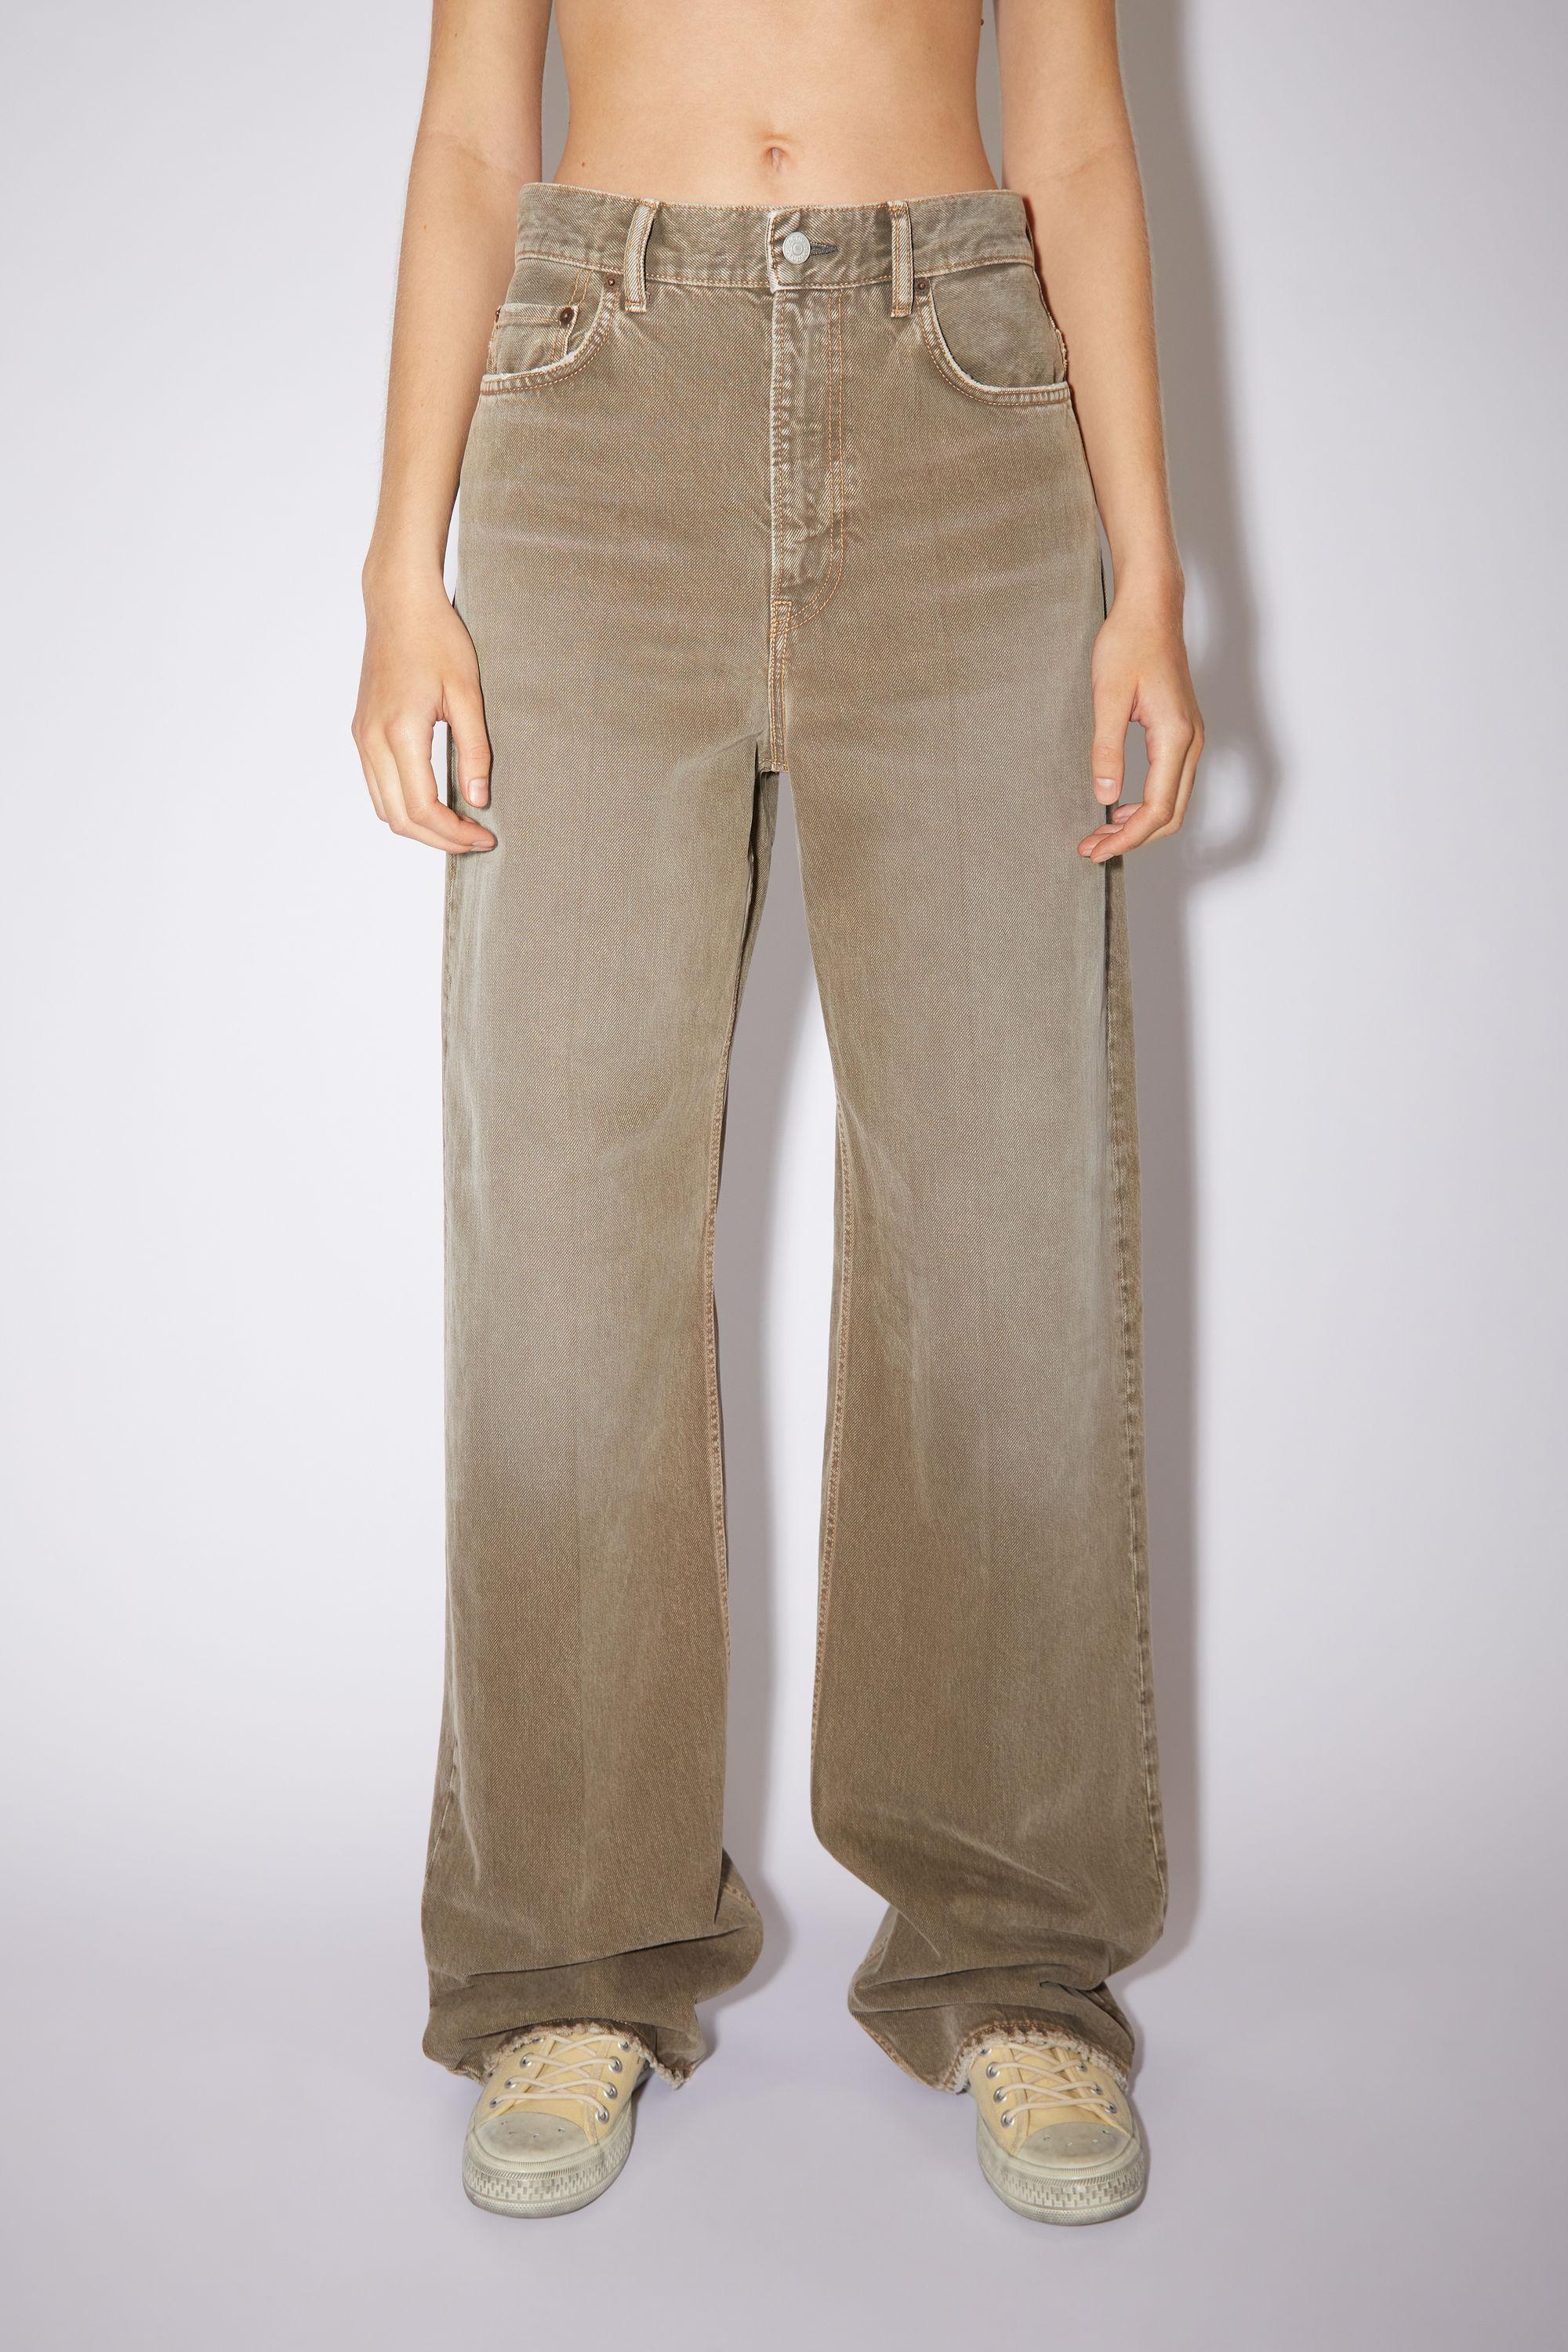 Acne Studios Dust Devil Loose Bootcut Jeans in Natural | Lyst